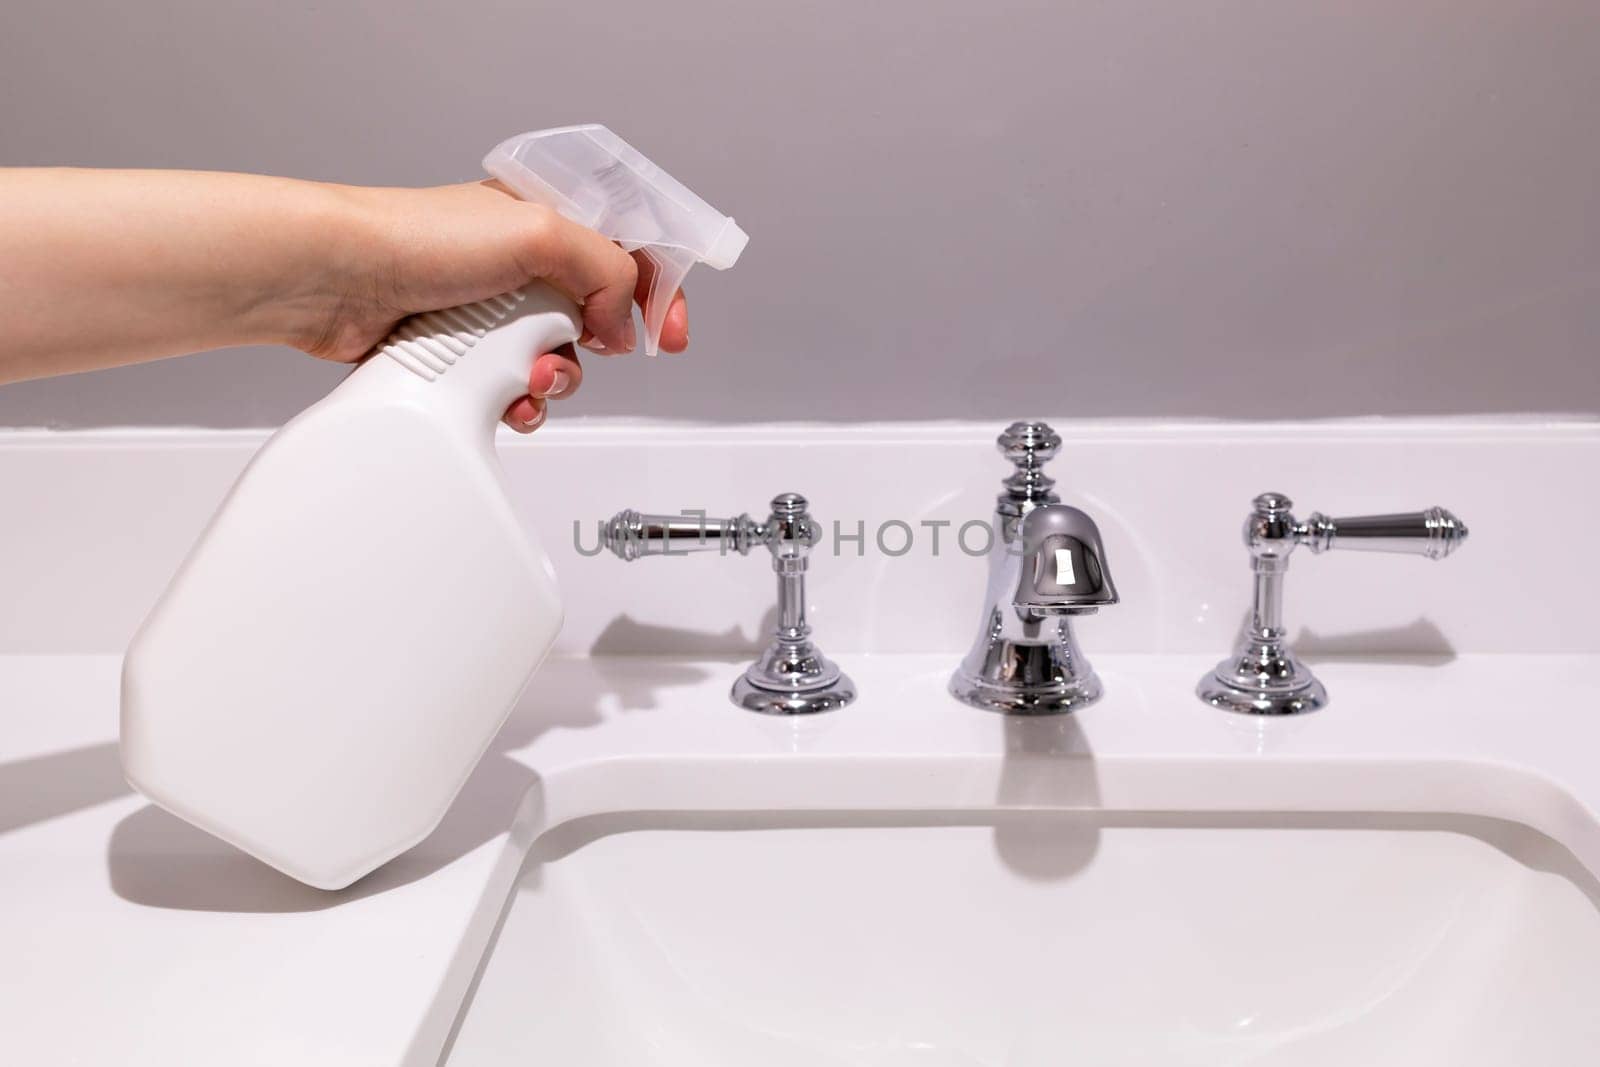 White Blank Plastic Spray Bottle In Female Hands On White Sink In Bathroom. Packaging Mockup. Blank Spray Bottle for Cleaning, Sanitary. Lifestyle. Empty Place For Text Or Logo Horizontal Plane